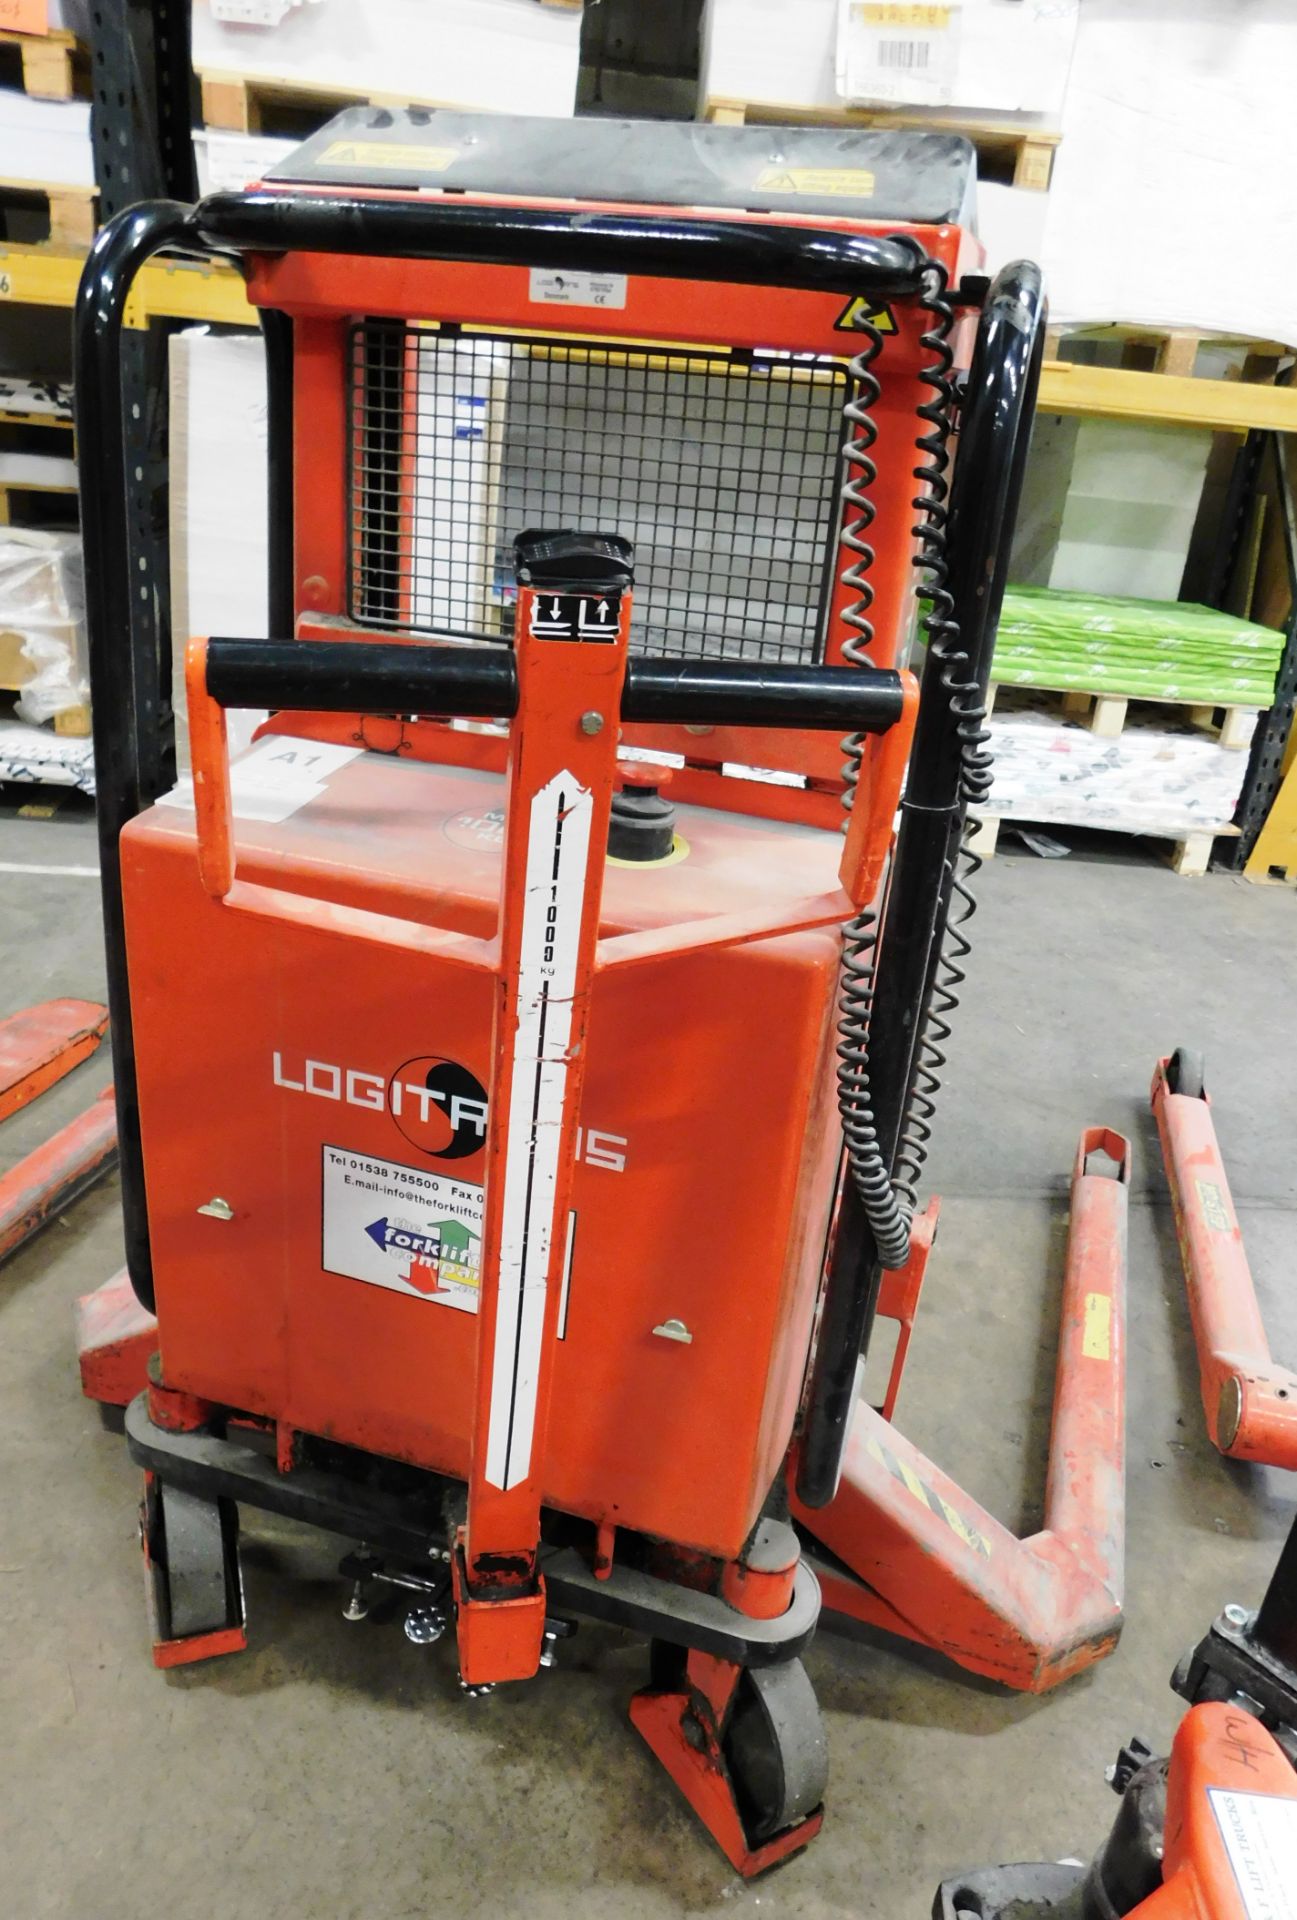 Logitrans LL100/TES Electric Pallet Truck, s/n 222 - Image 2 of 2